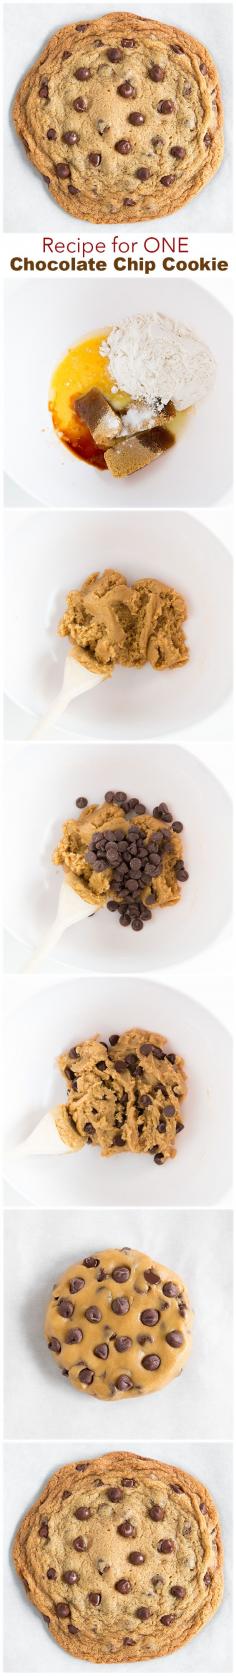 One Big Chocolate Chip Cookie. Use small cookie scoop and bake in bakery bites express mini cupcake mold for 8 mins. OR double the recipe and use large cookie scoop to bake 5 big cookies 12-14 mins (not as big as hers, but pretty darn big-and thick too).